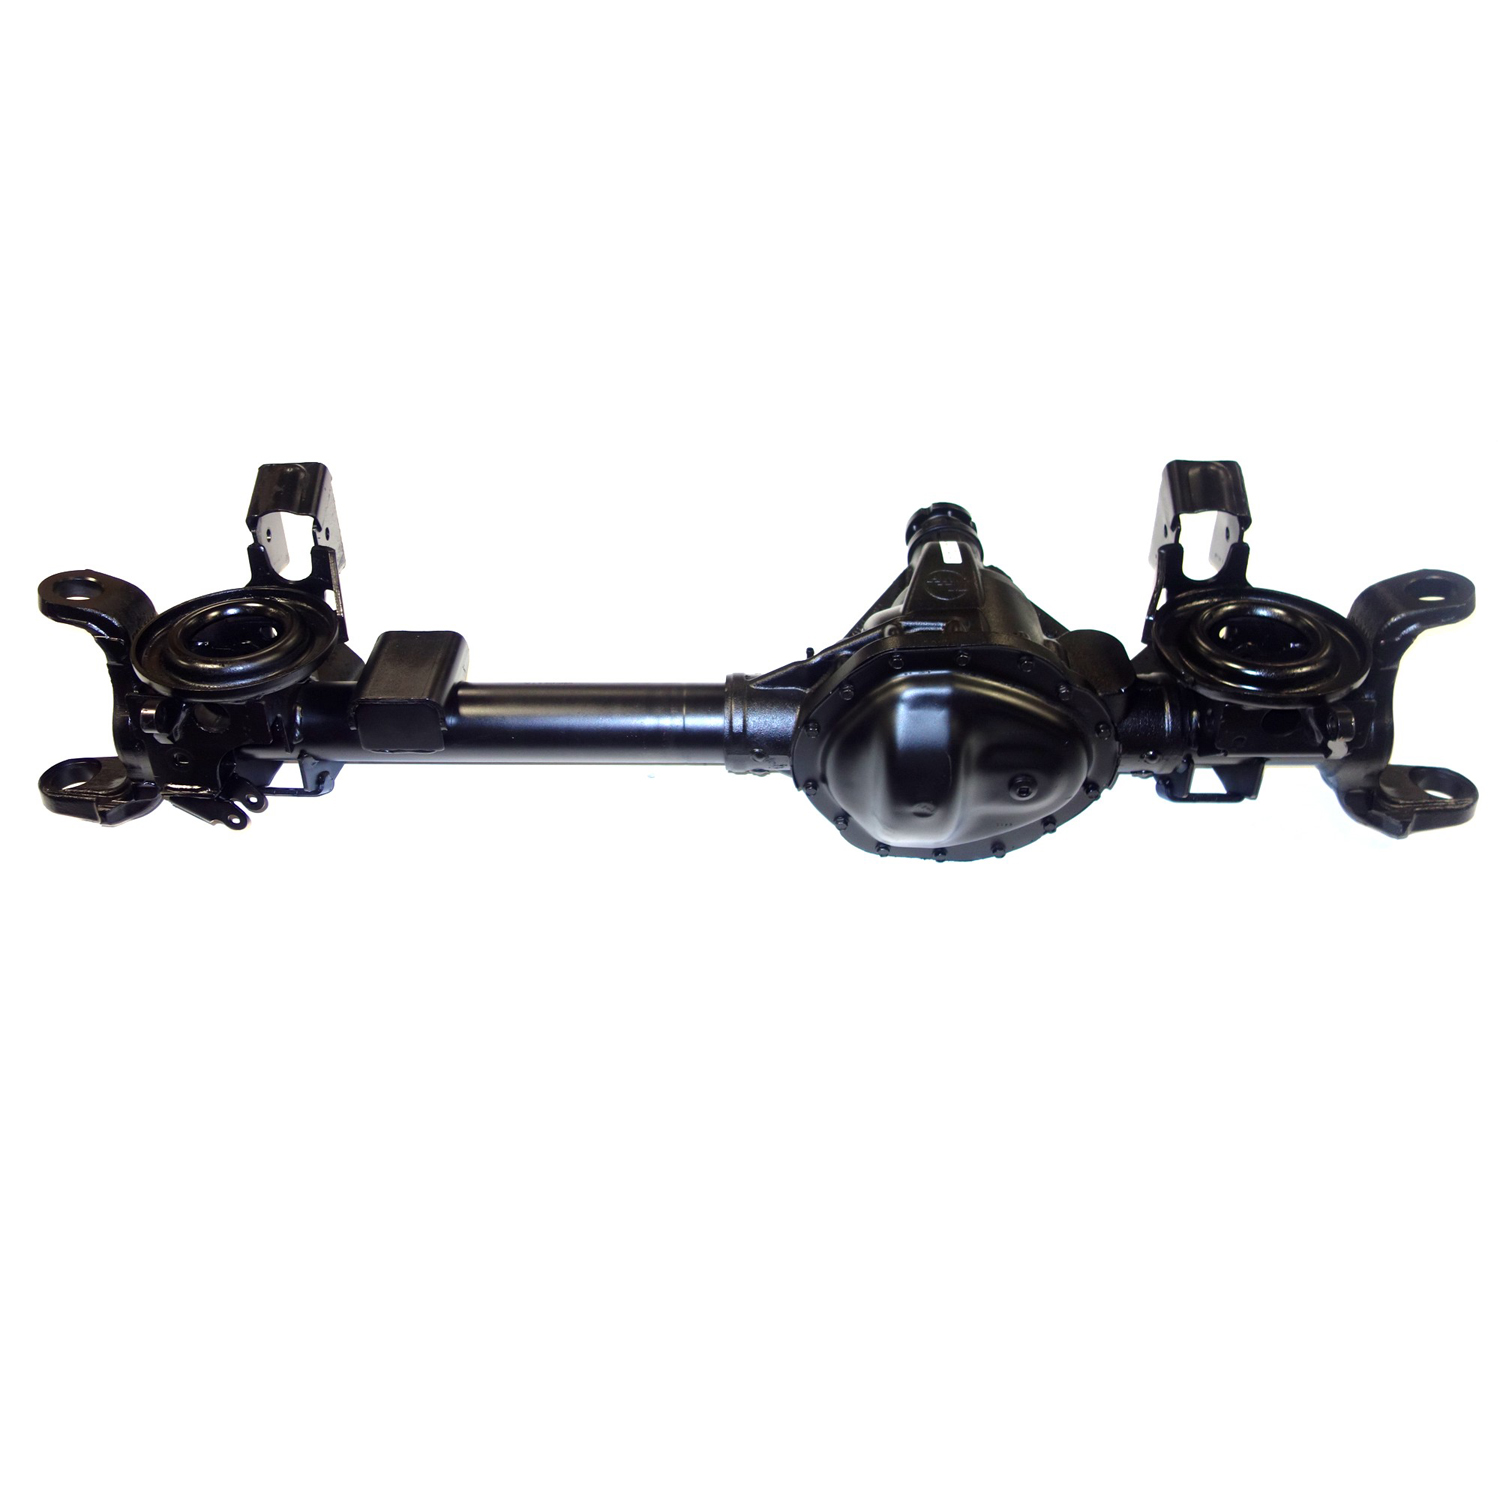 Reman Axle Assembly for Chrysler 9.25" Front 10-11 Dodge Ram 3.42 Ratio